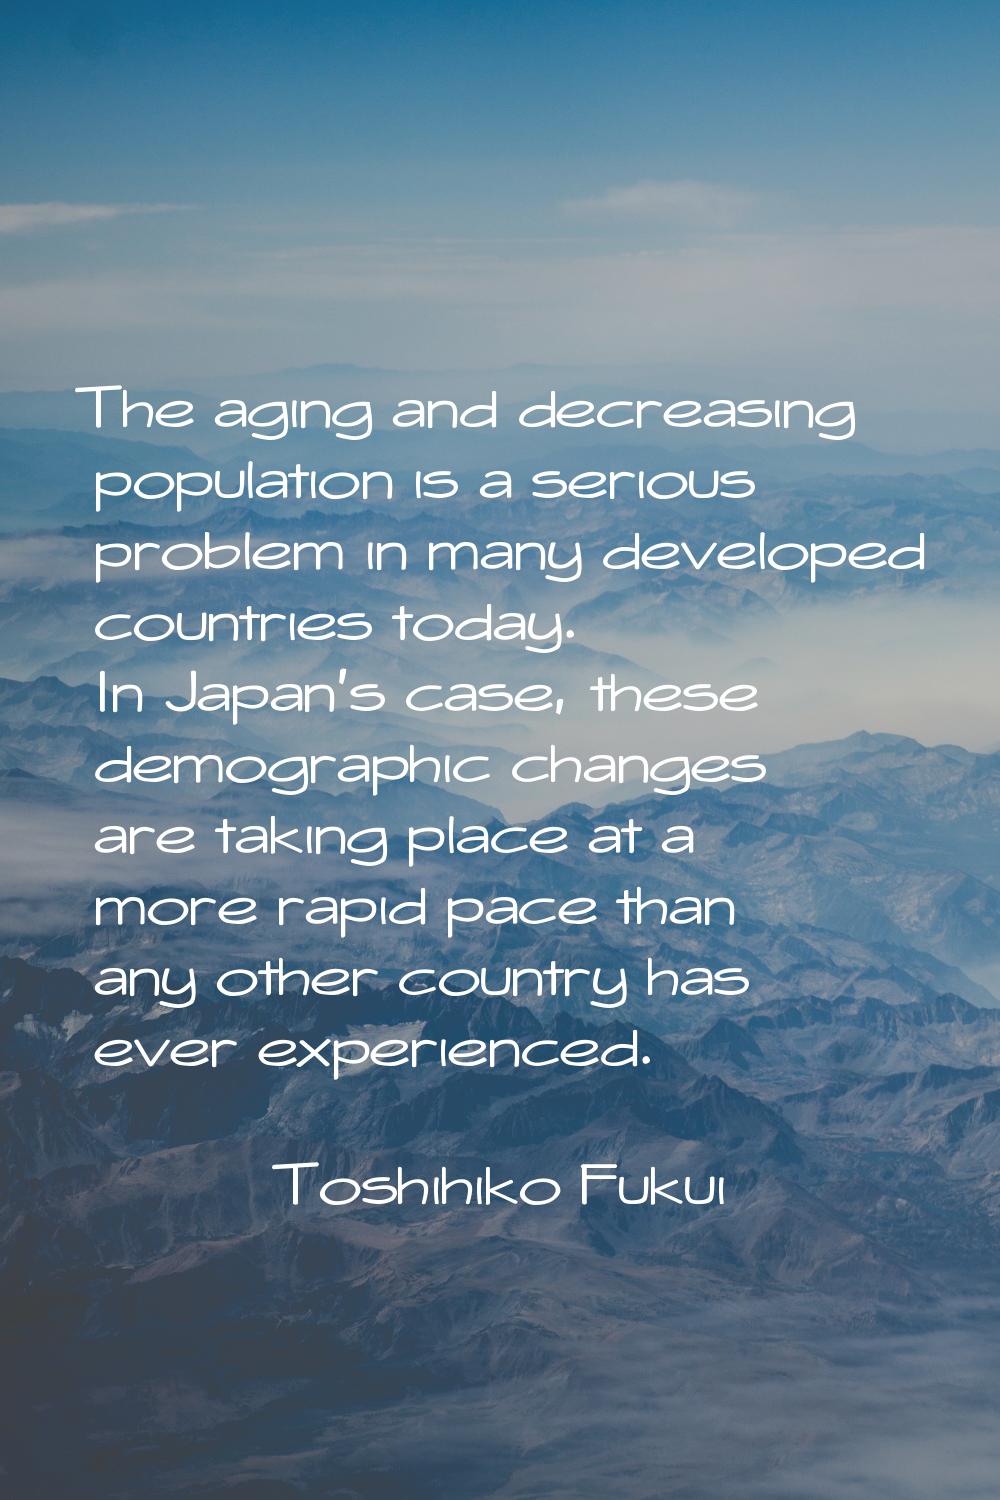 The aging and decreasing population is a serious problem in many developed countries today. In Japa